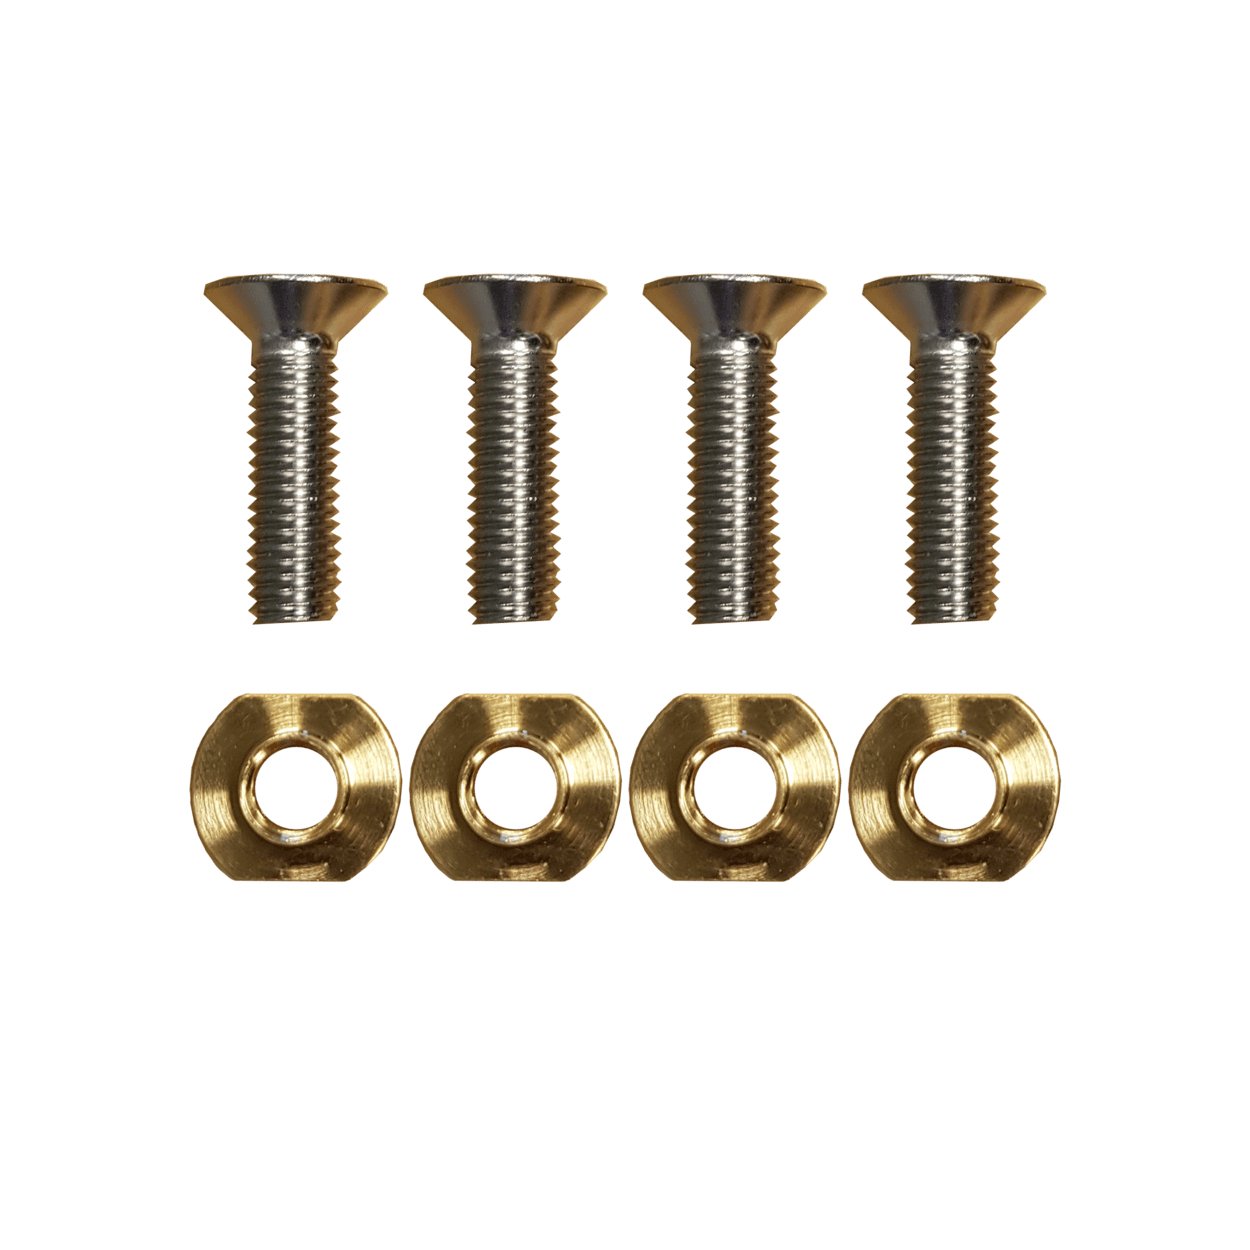 Fanatic X Foil Mounting System (Screws+Nuts) (4pcs) 2021 - Worthing Watersports - 9008415919093 - Spareparts - Fanatic X